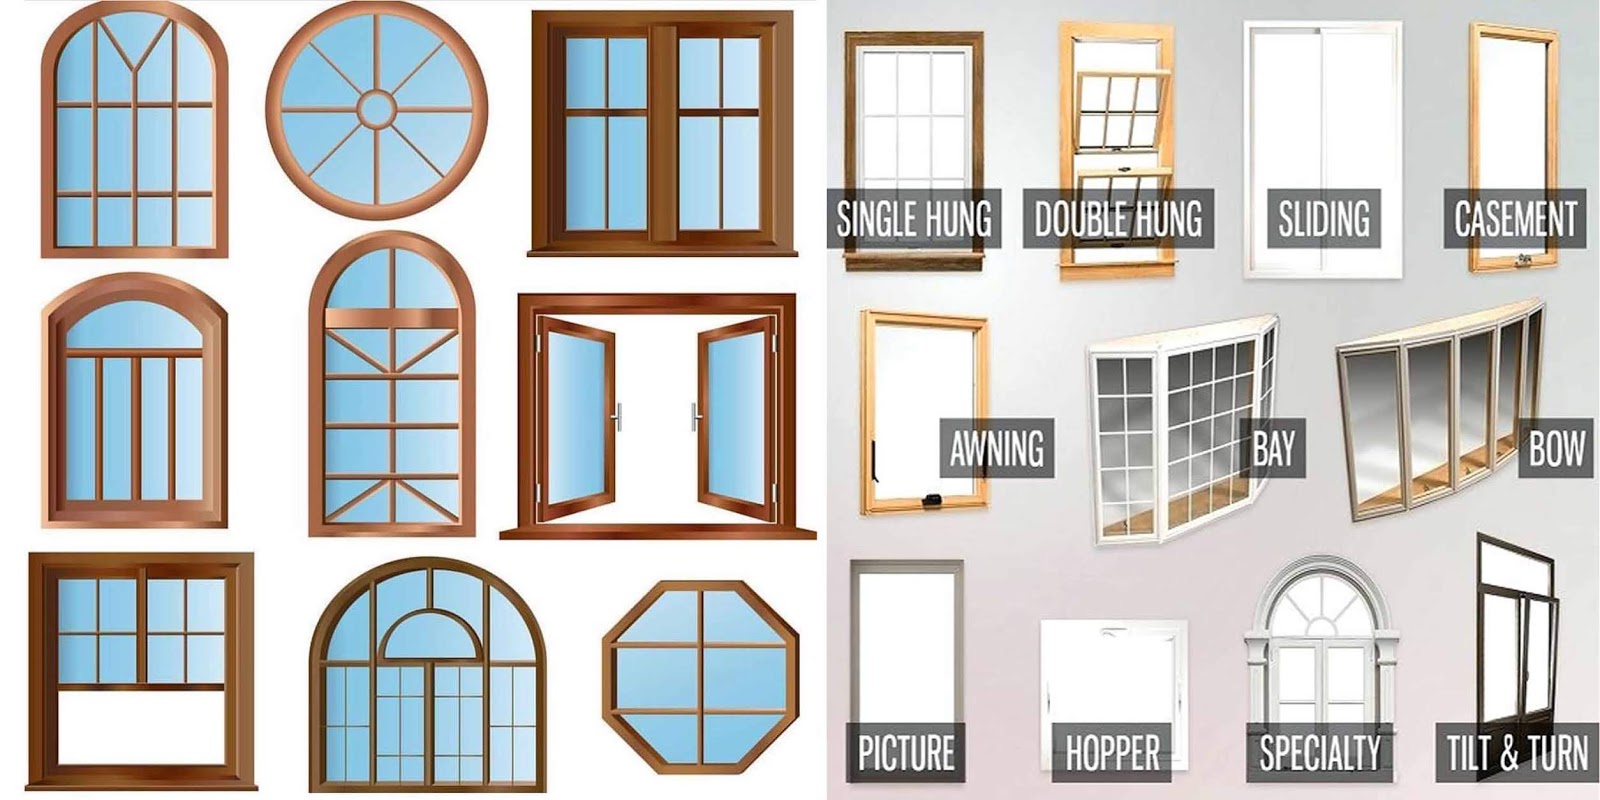 Top 60 Amazing Windows Design Ideas You Want To See Them ...